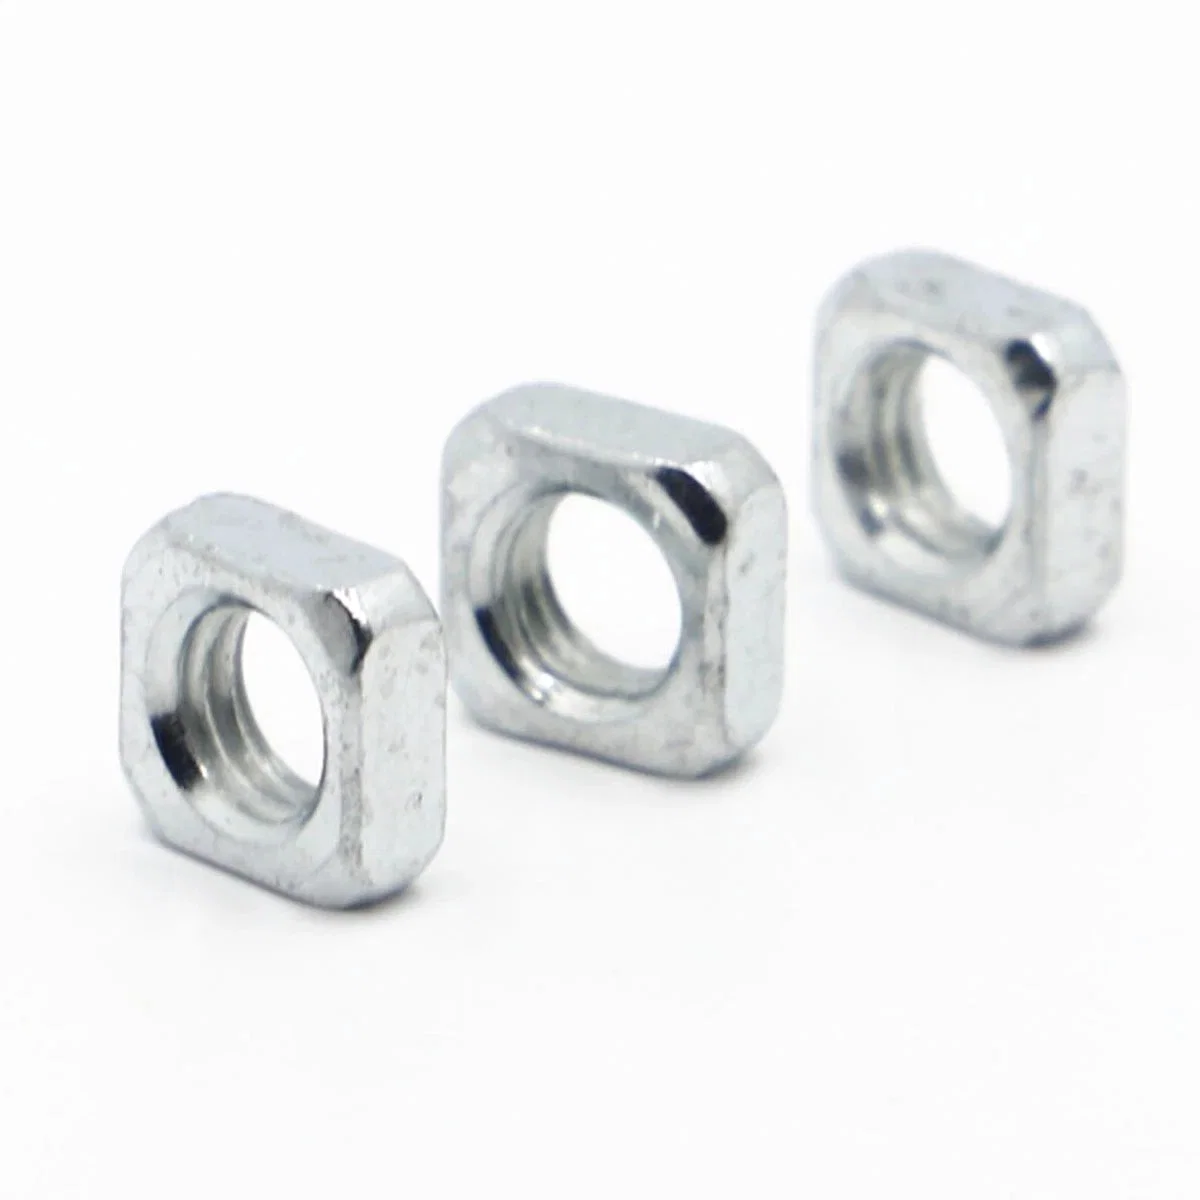 M3 M4 M5 Stainless Steel Square Nuts DIN557 Square Nut